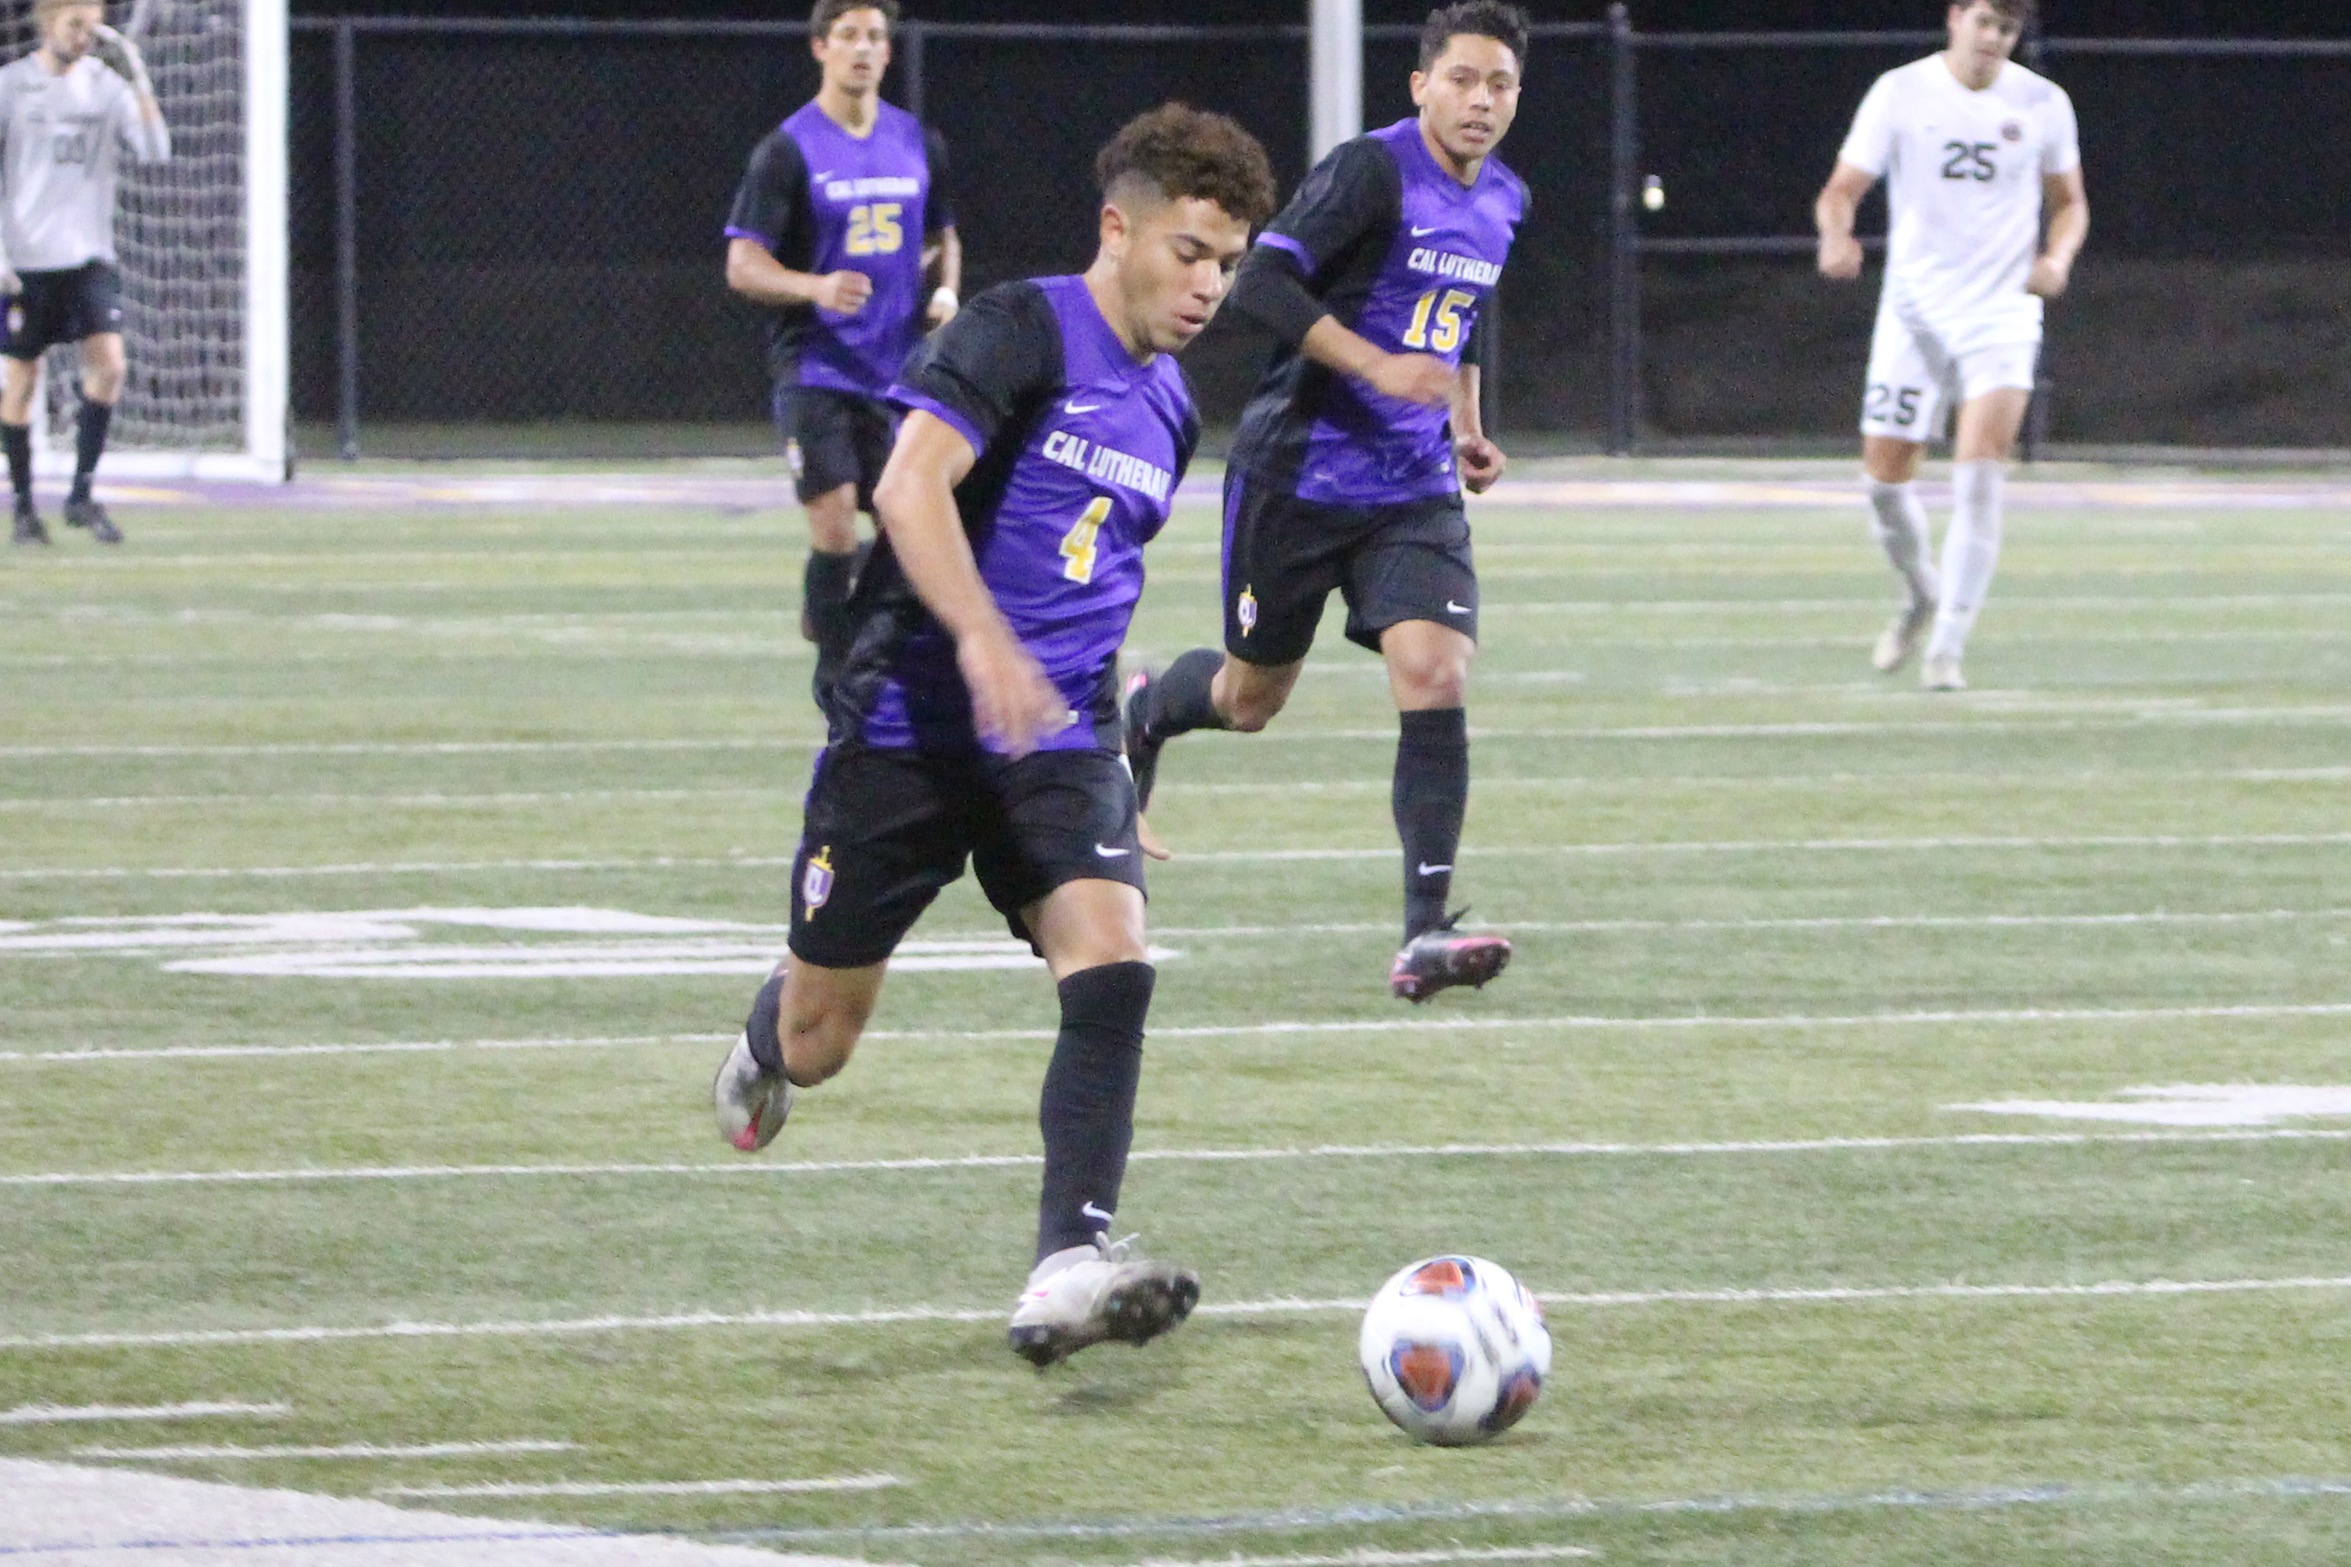 Christian Gonzalez scores the game winner in the 100th minute as Kingsmen defeat Chapman 3-2.